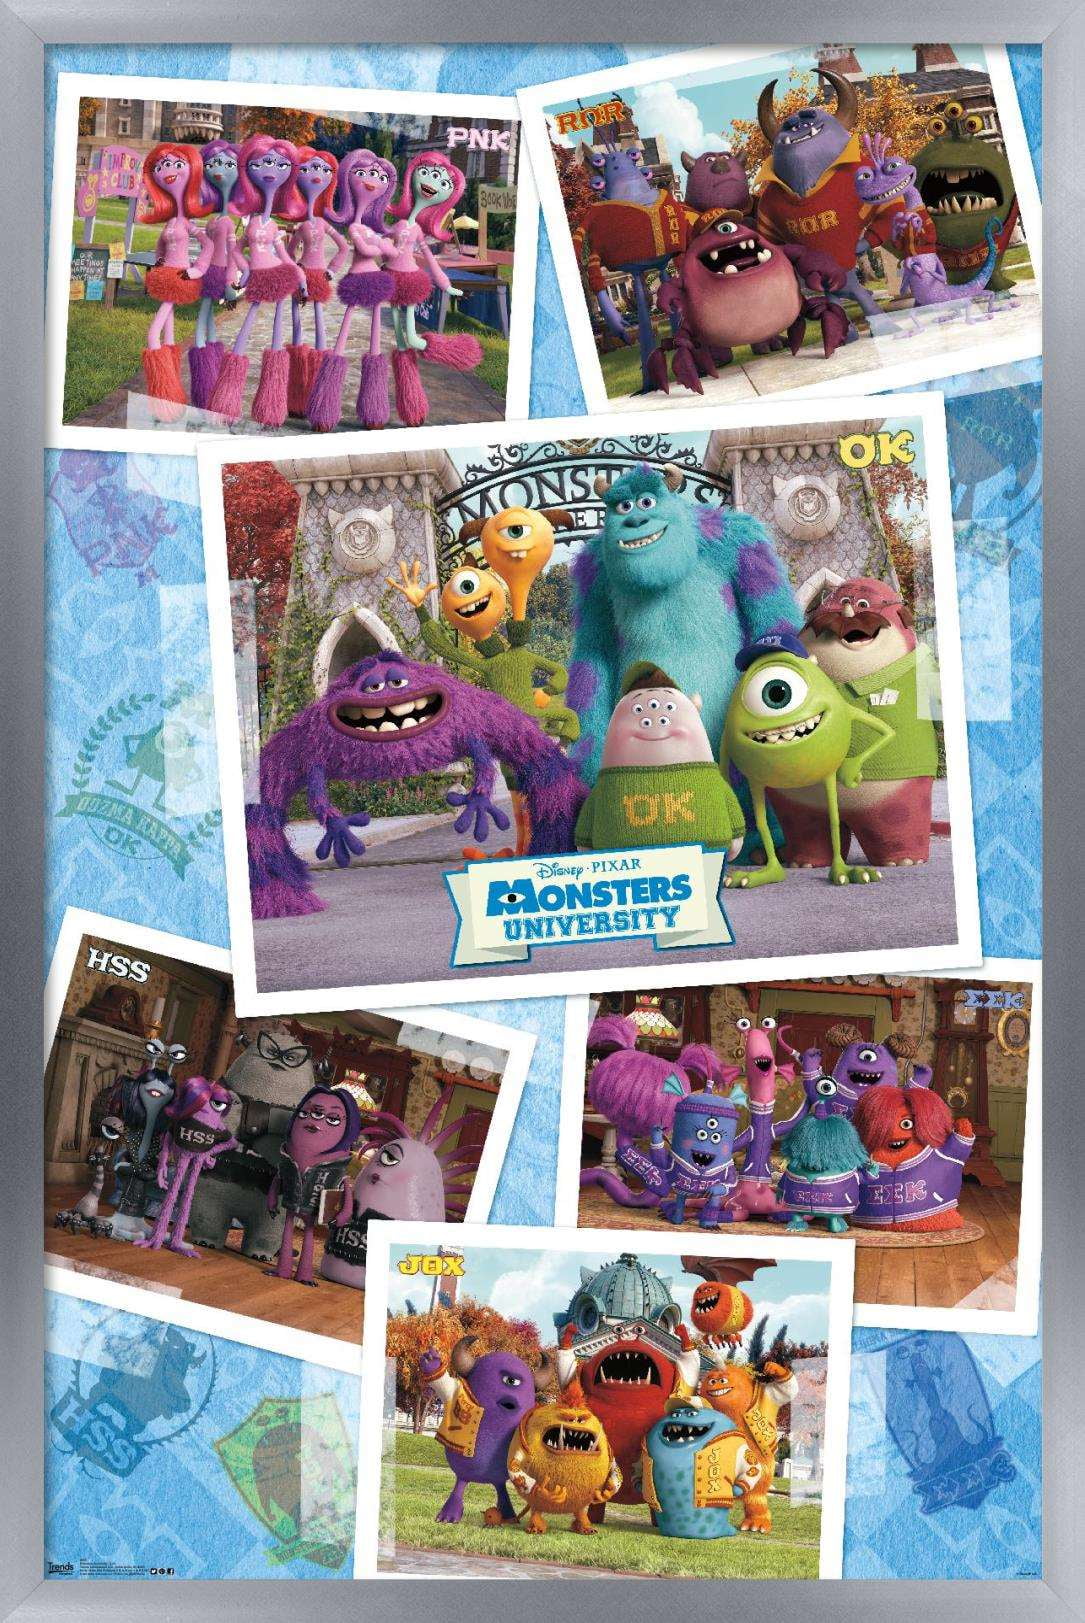 New 'Monsters University' Character Posters!